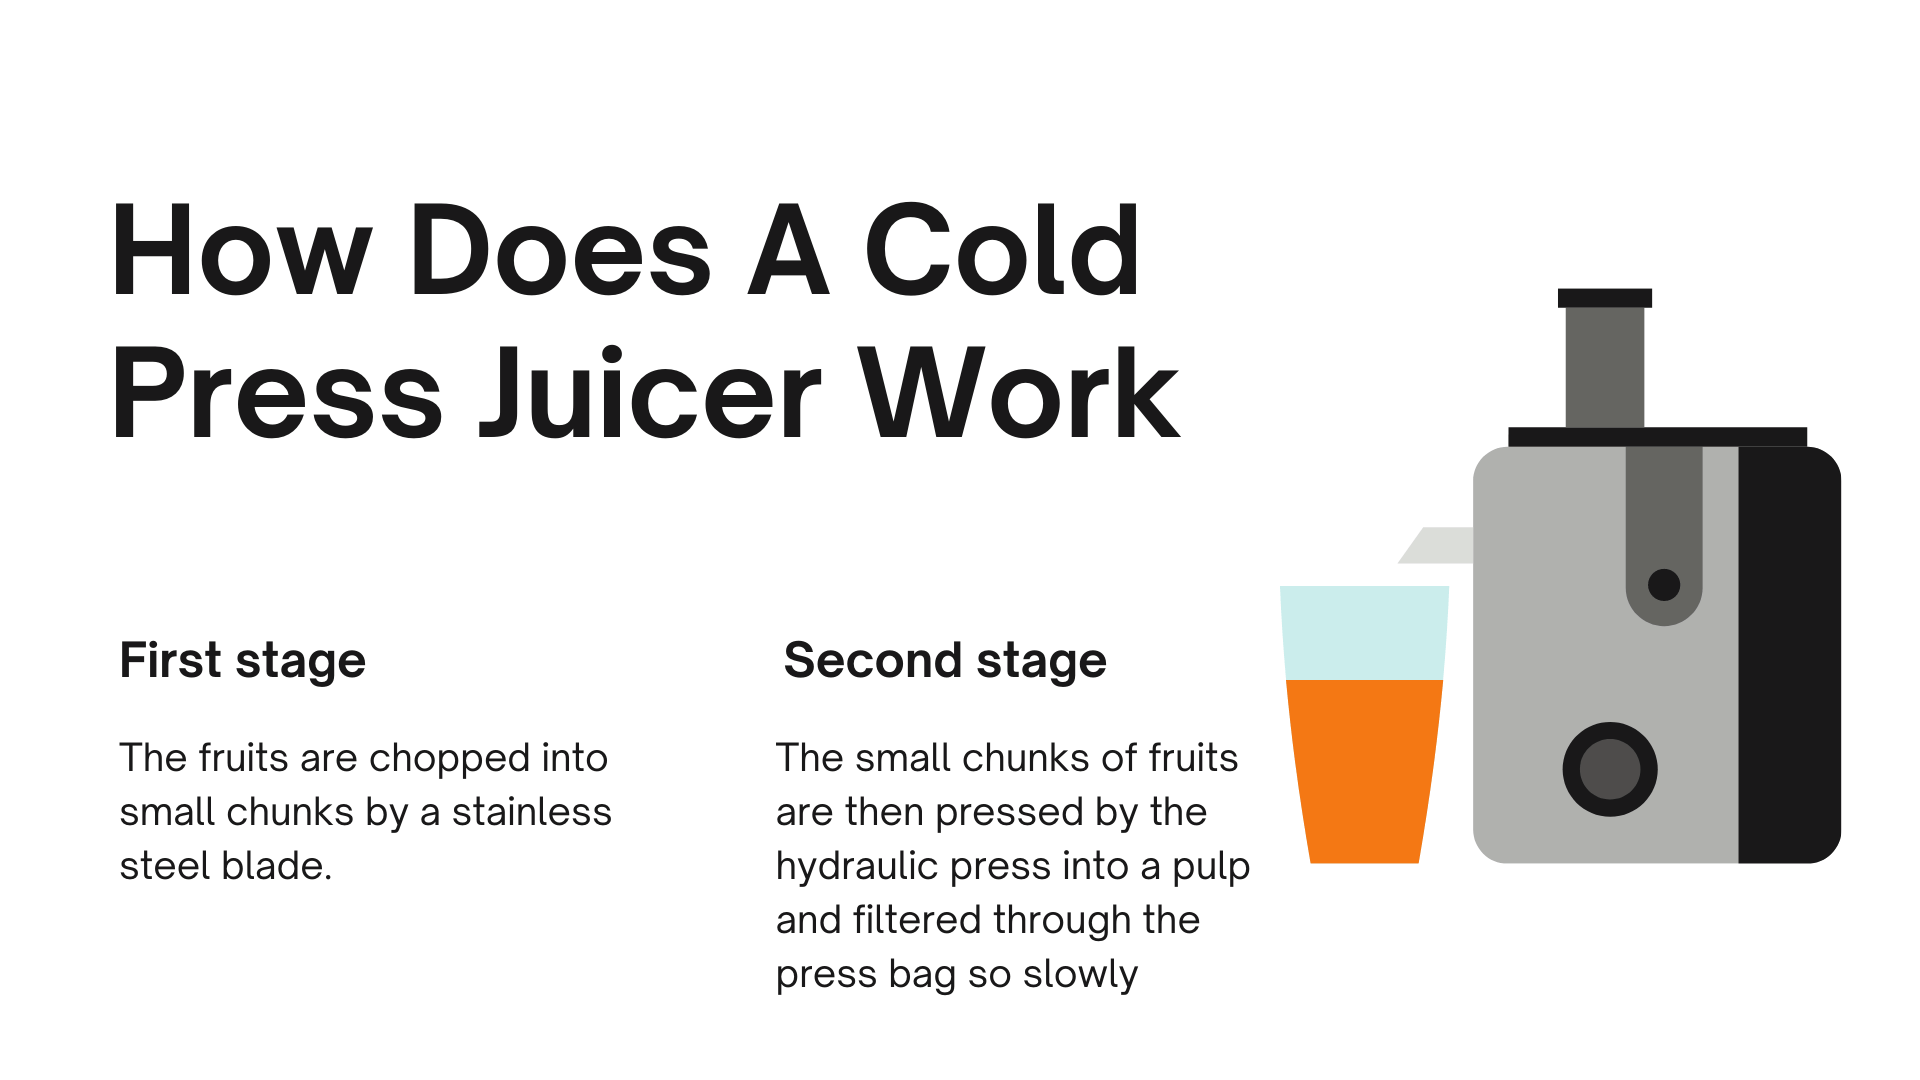 How Does A Cold Press Juicer Work